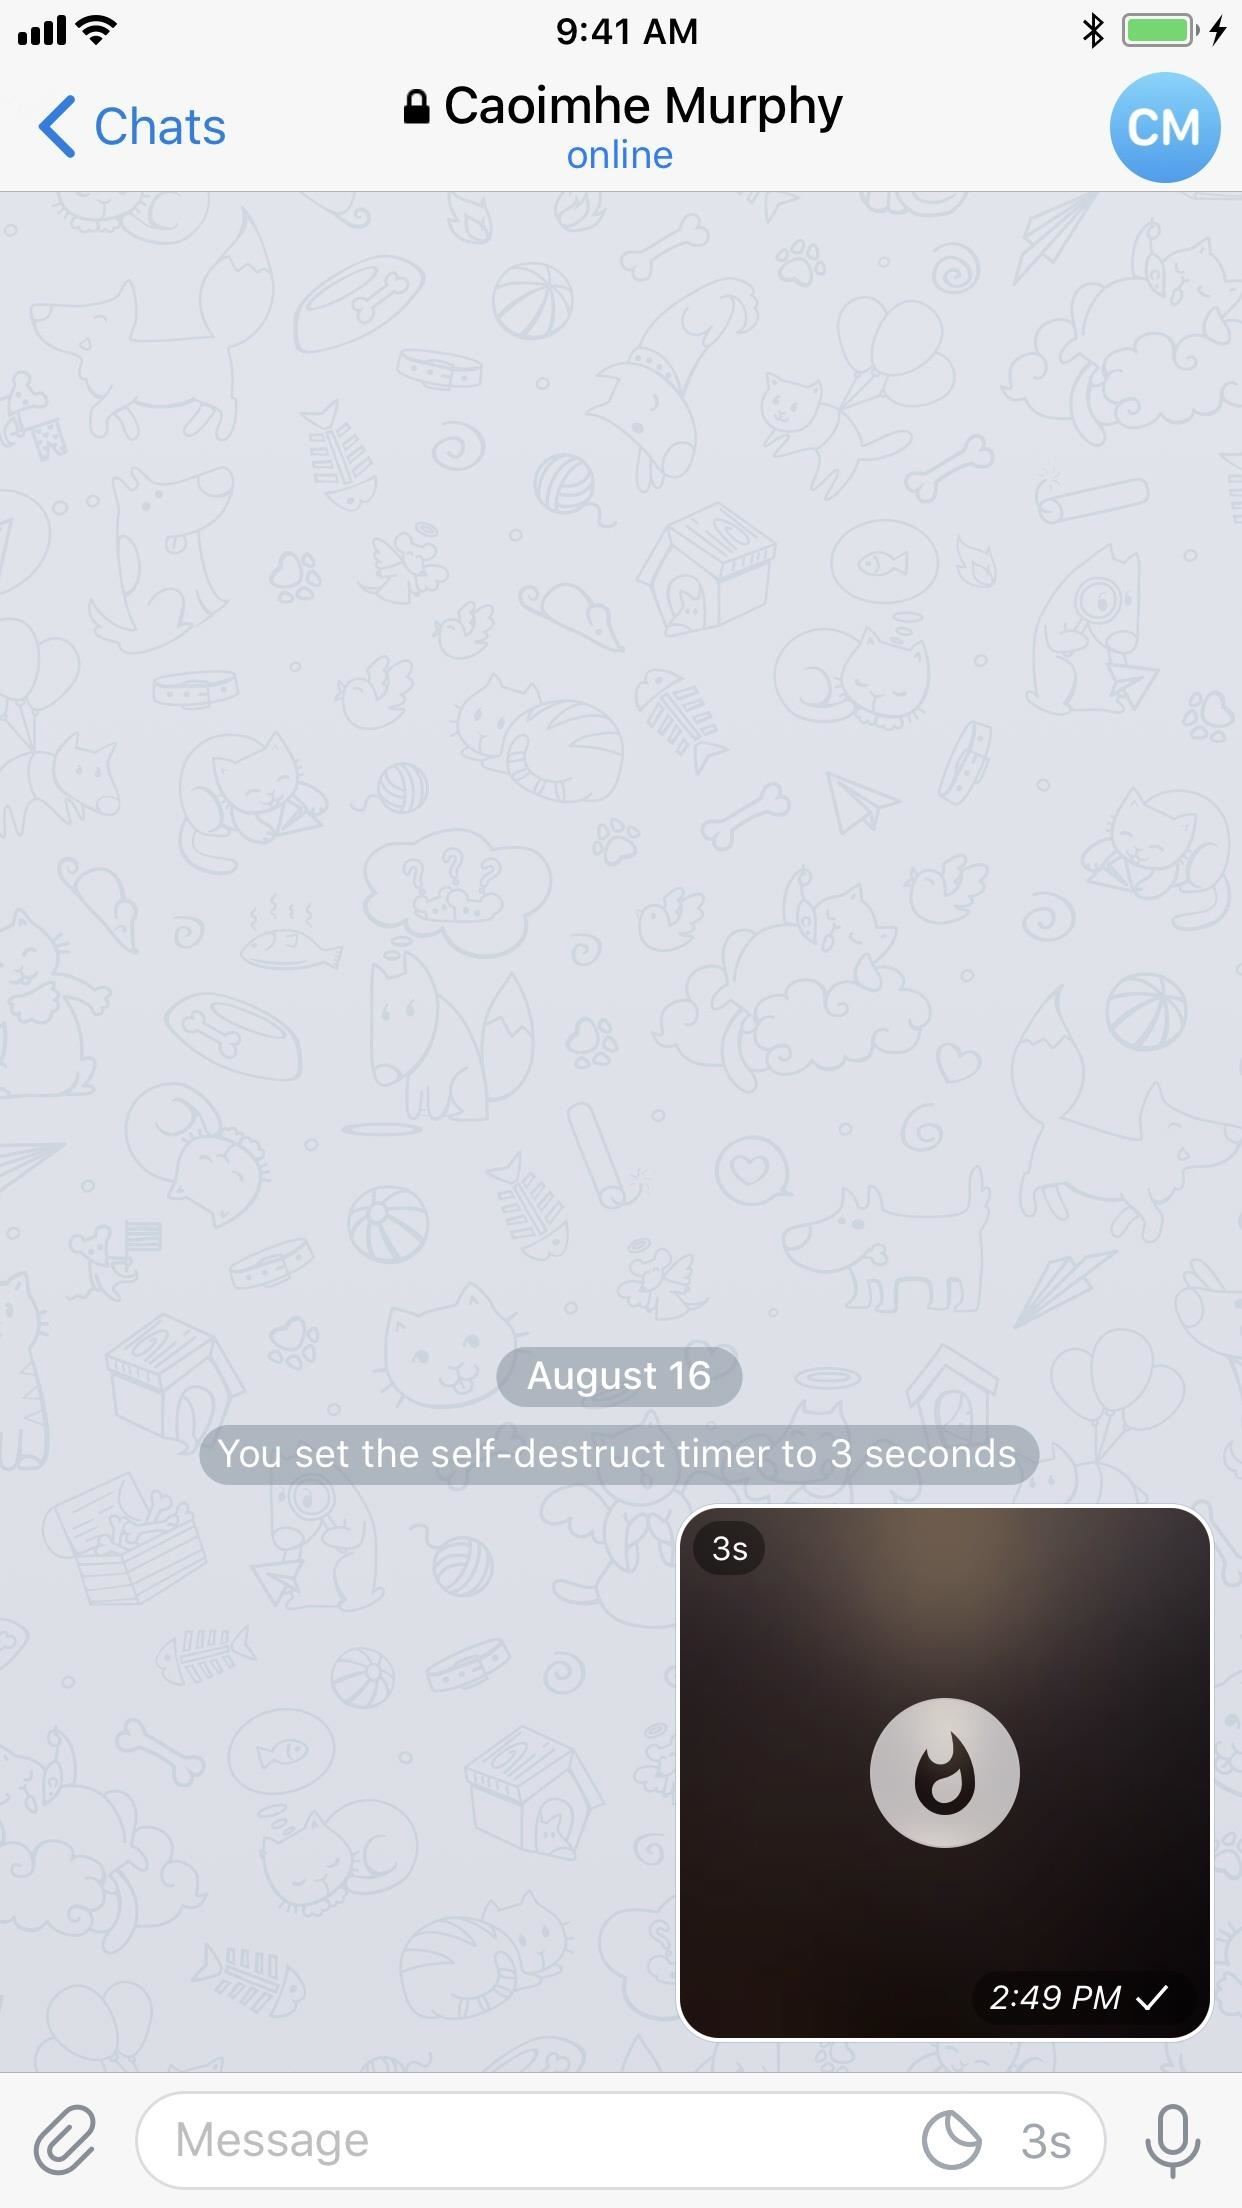 Telegram 101: How to Send Self-Destructing Messages in Chats